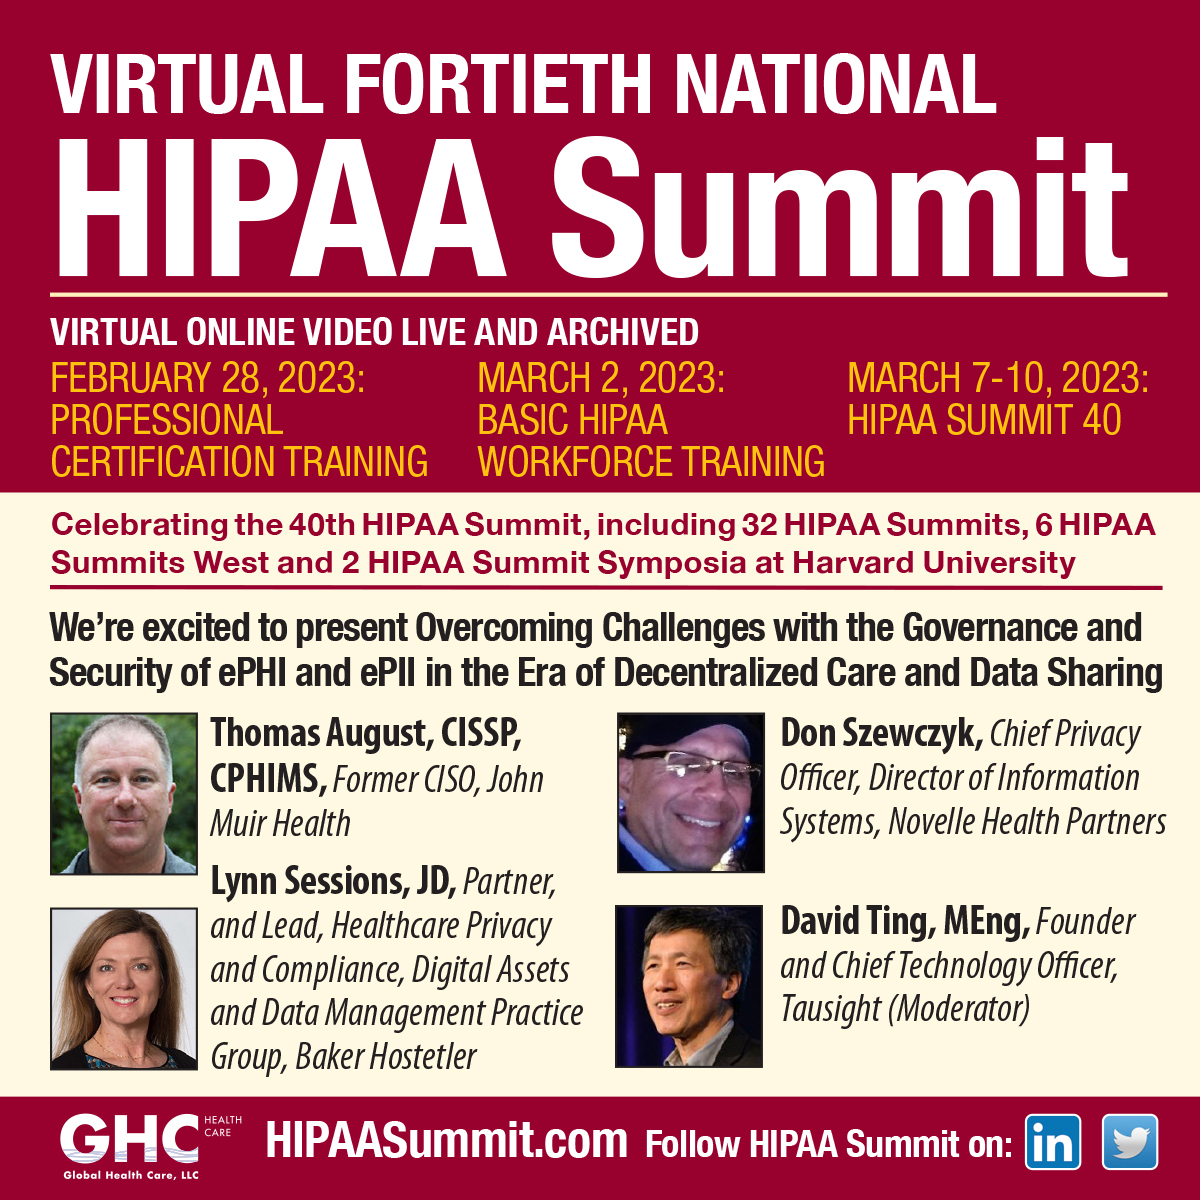 Overcoming Challenges with the Governance and Security of ePHI and ePII in the Era of Decentralized Care and Data Sharing – The Virtual Fortieth National HIPAA Summit